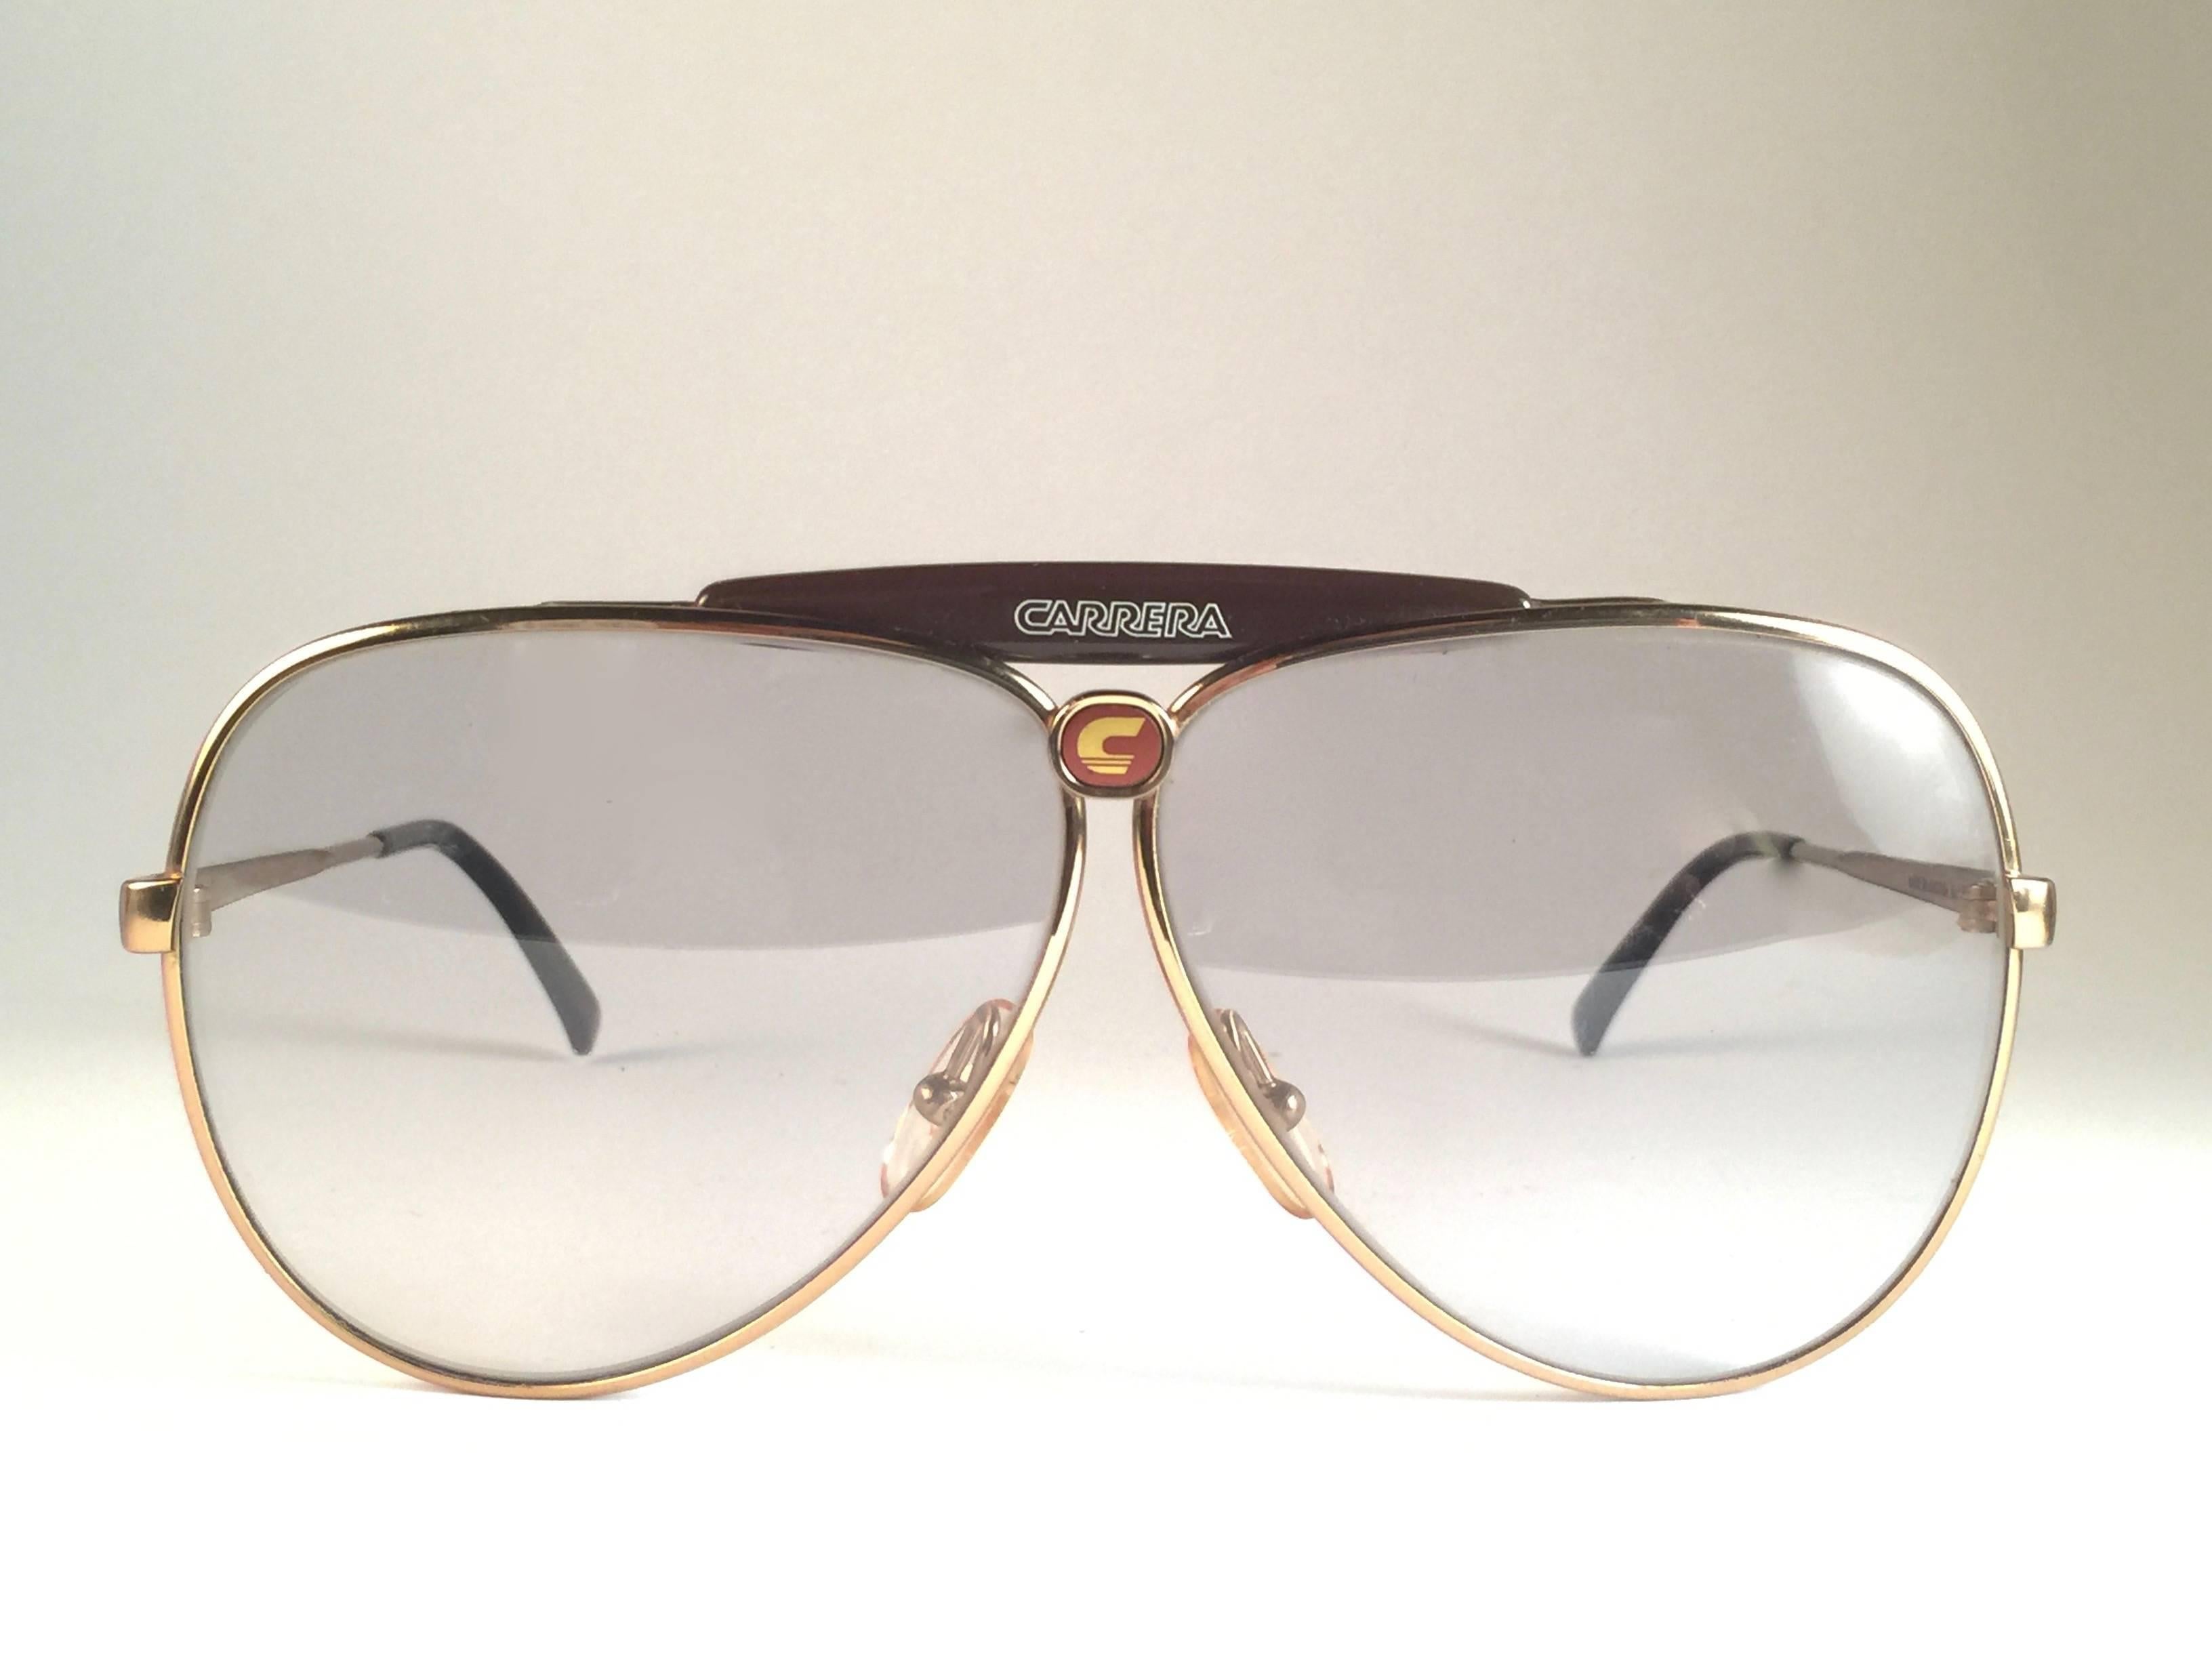 New 1970's Carrera aviator frame with light / clear lenses.  

Amazing craftsmanship and quality.   

Comes with the original black Carrera hard case thats has some wear on it due to nearly 40 years of storage.   

New, never worn. Made in Austria.